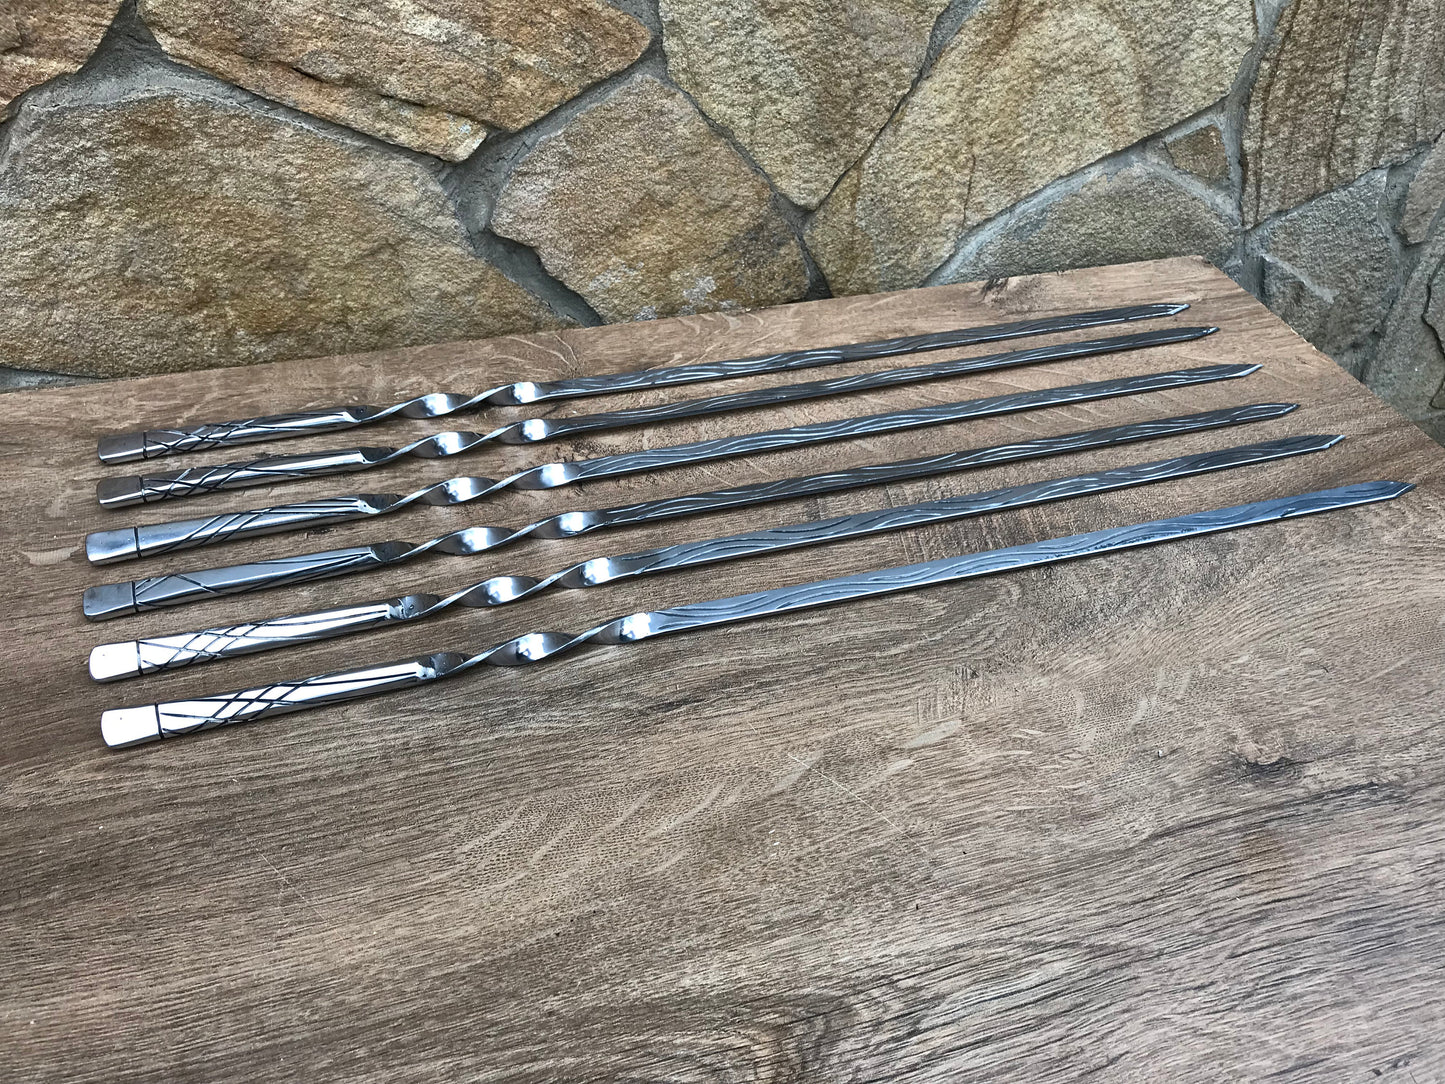 11th anniversary, skewers, gift for Dad, gift for grandpa, steel anniversary, mens jewelry, camping fire, Christmas gift, camping gifts, BBQ